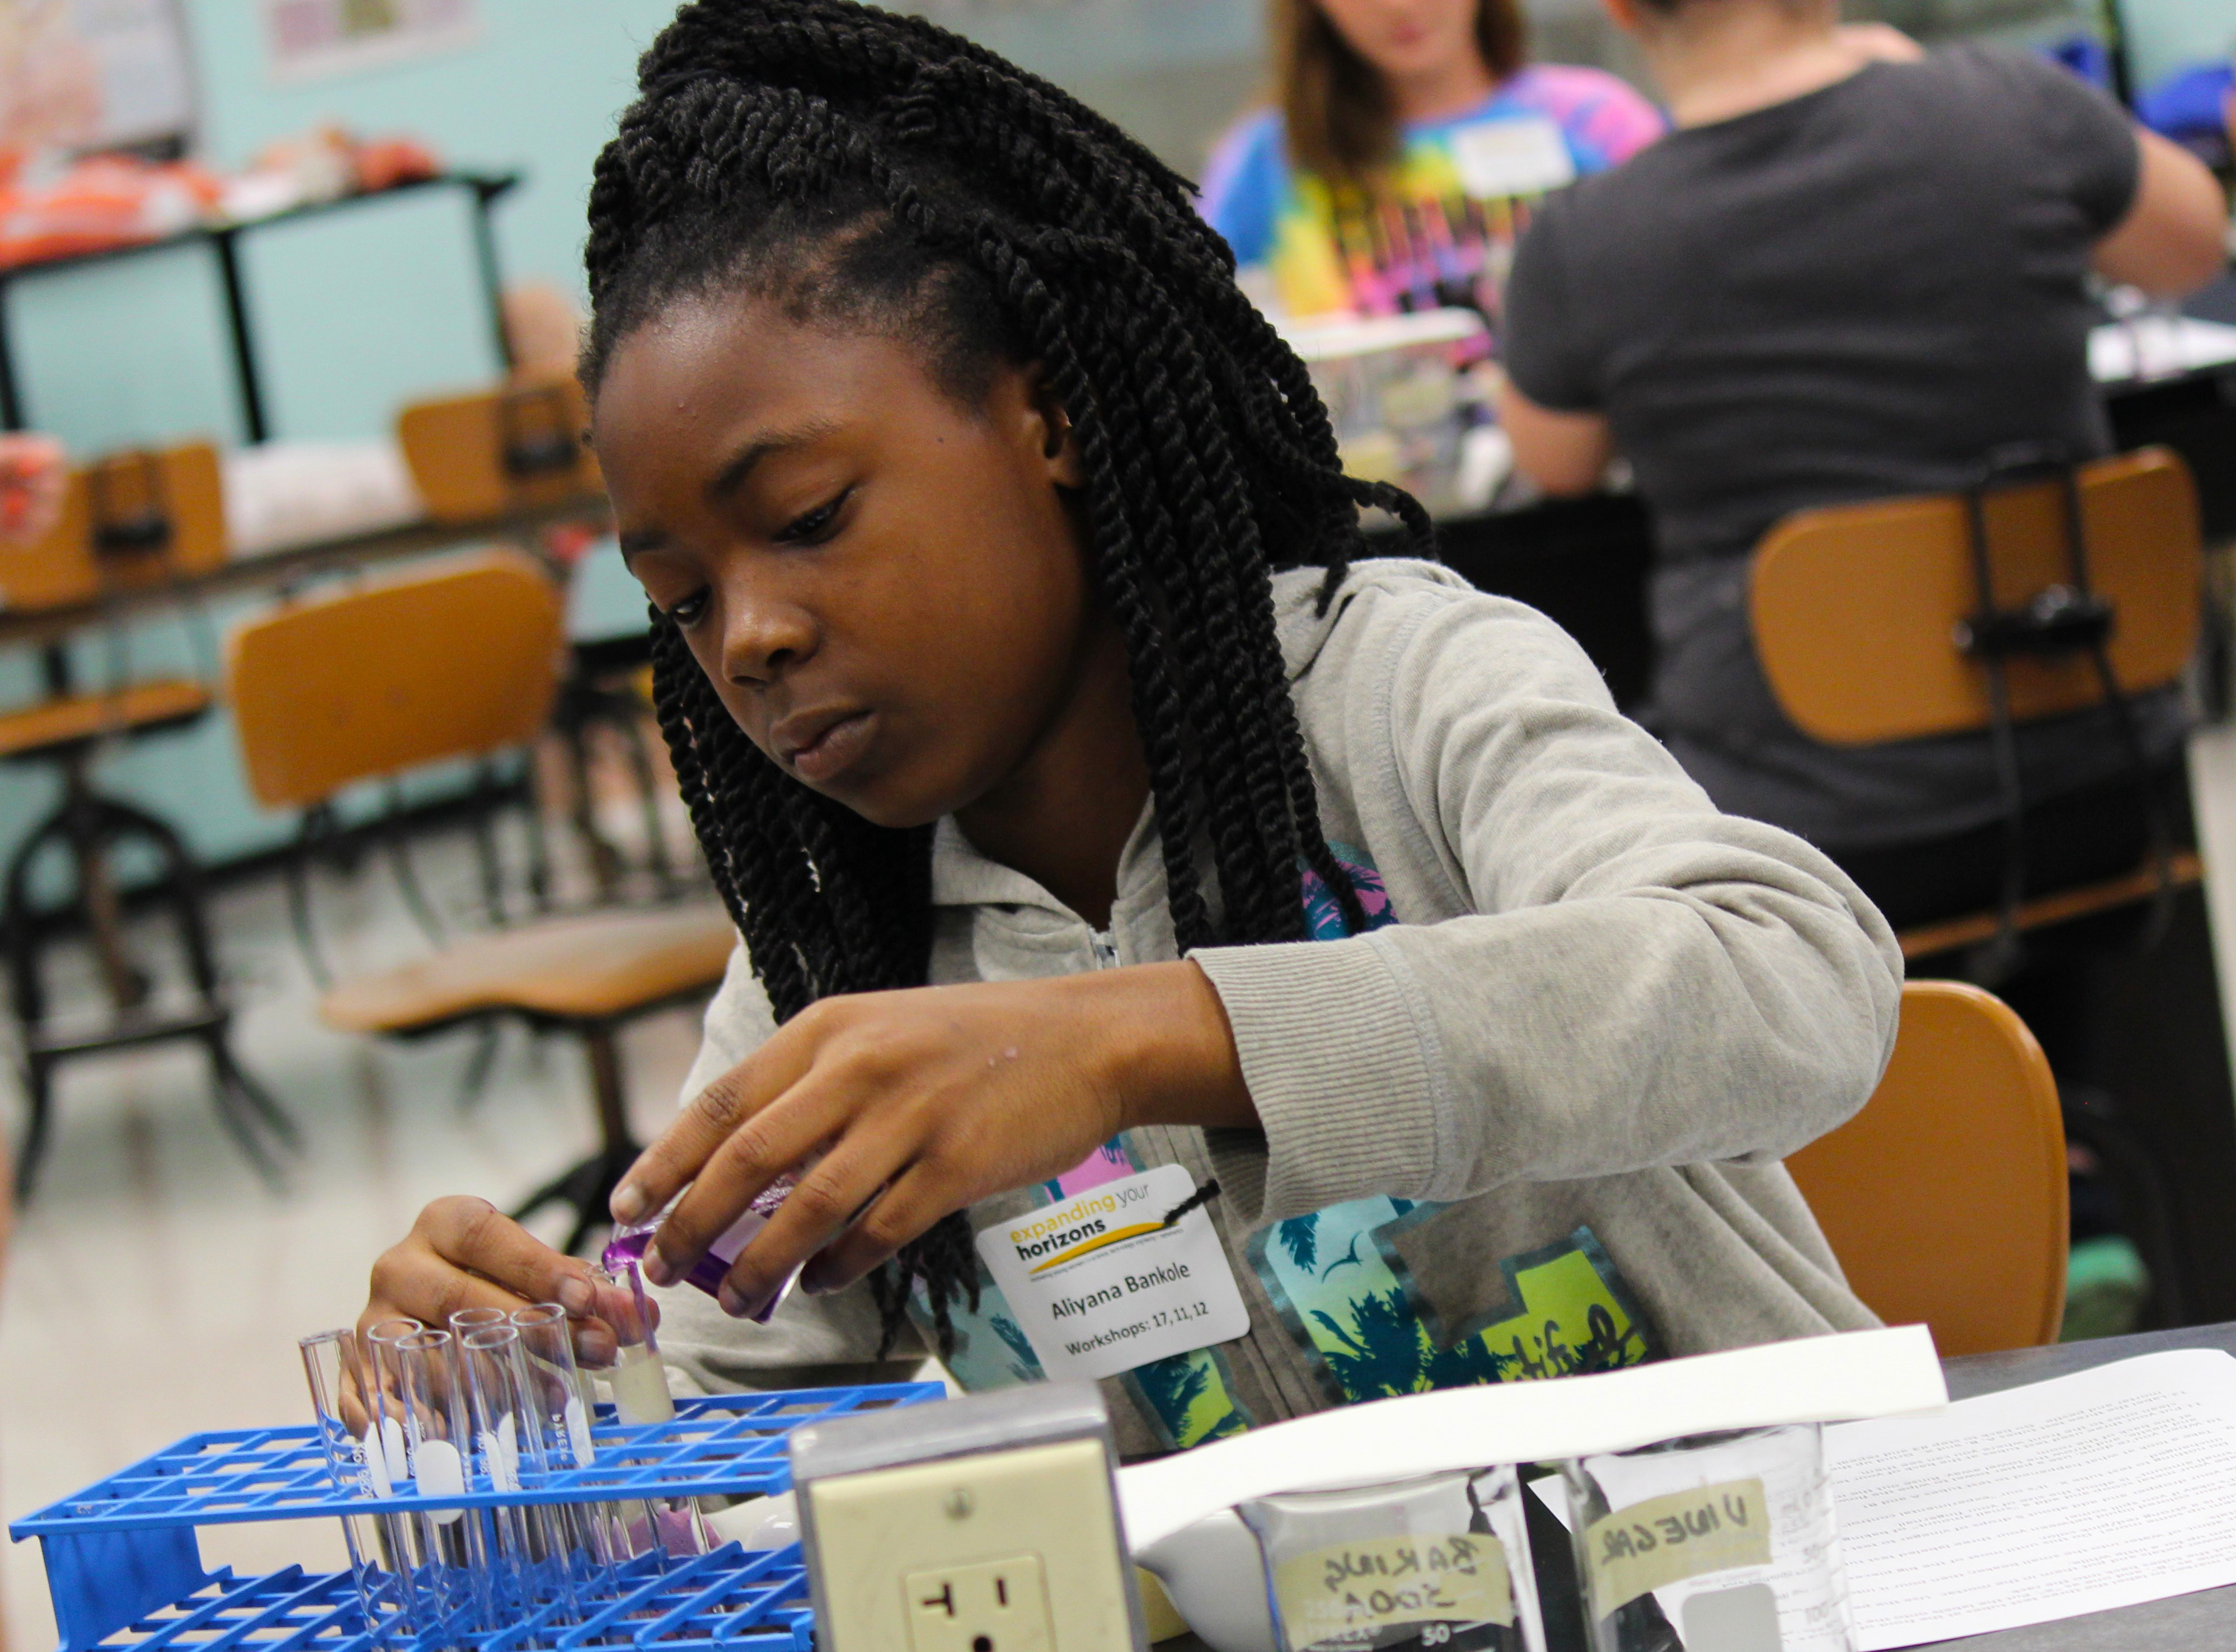 Middle school girls will have the opportunity to explore career options in science, technology, engineering and math (STEM) during an Oct. 28 event at Wichita State University.